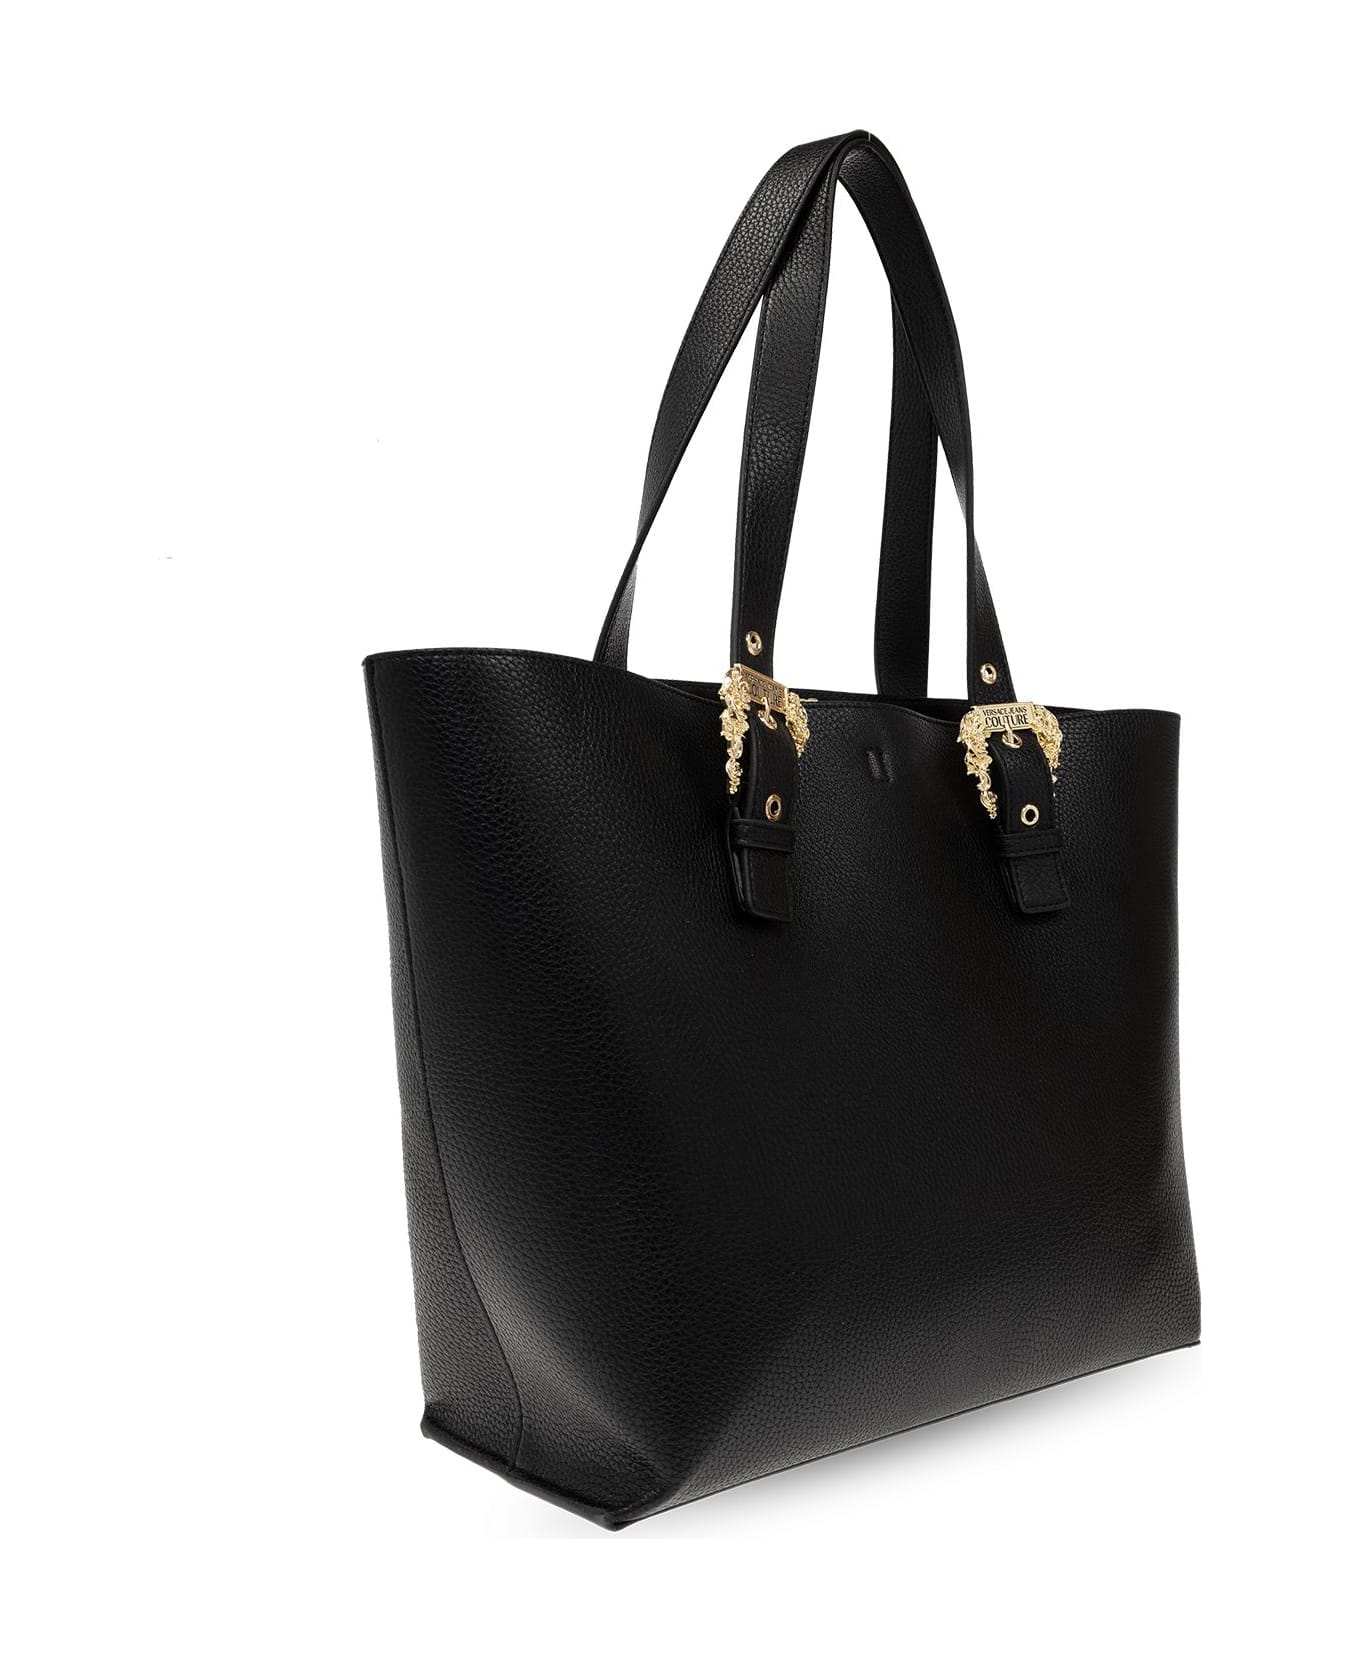 Versace Jeans Couture Buckle Detailed Tote Bag - NERO